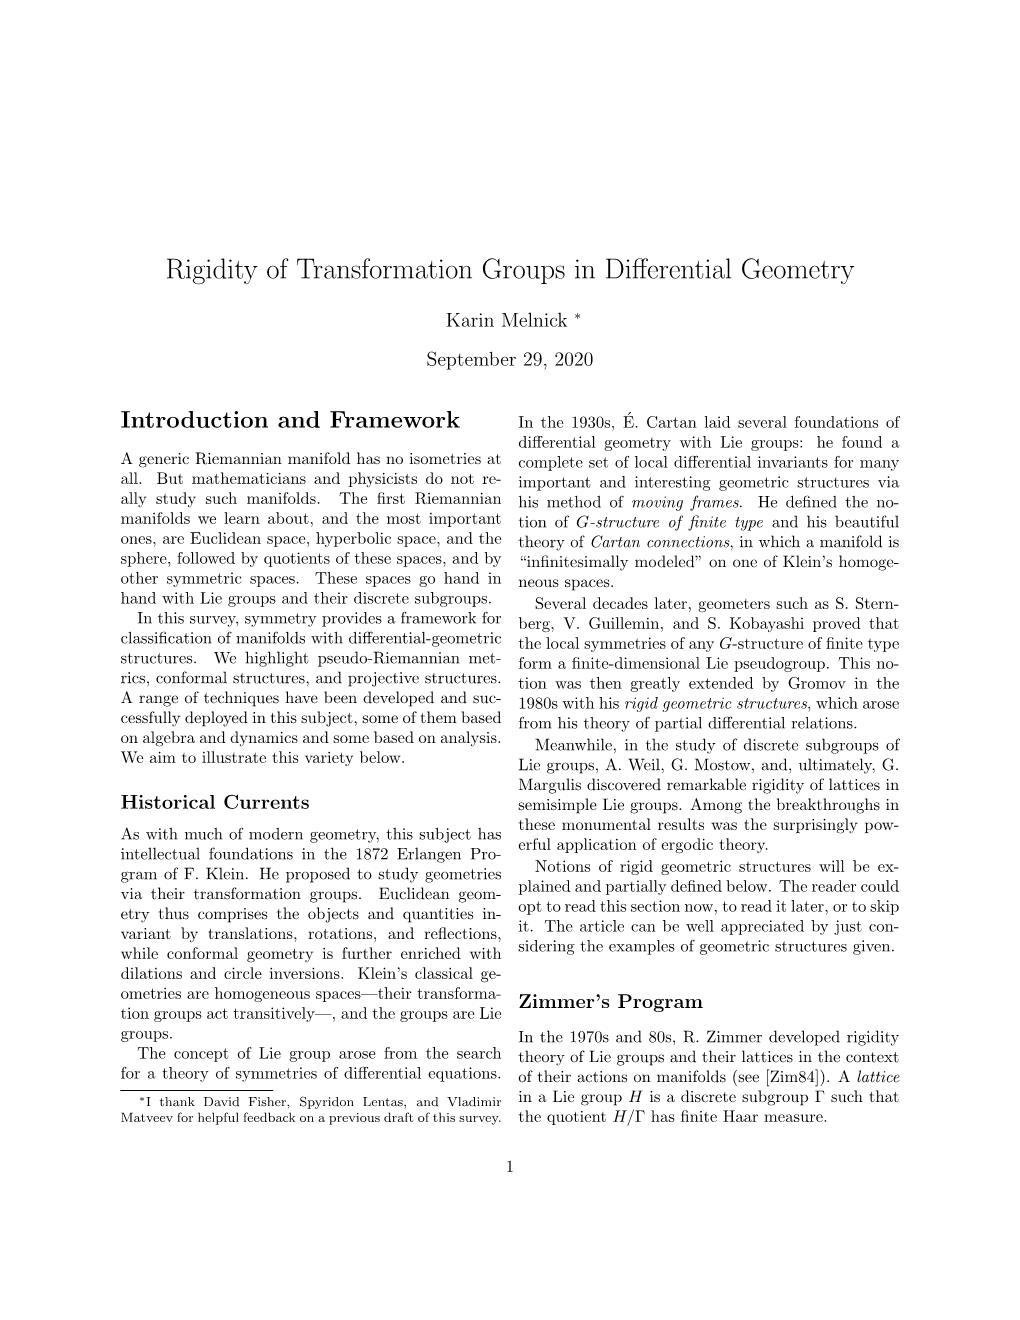 Rigidity of Transformation Groups in Differential Geometry